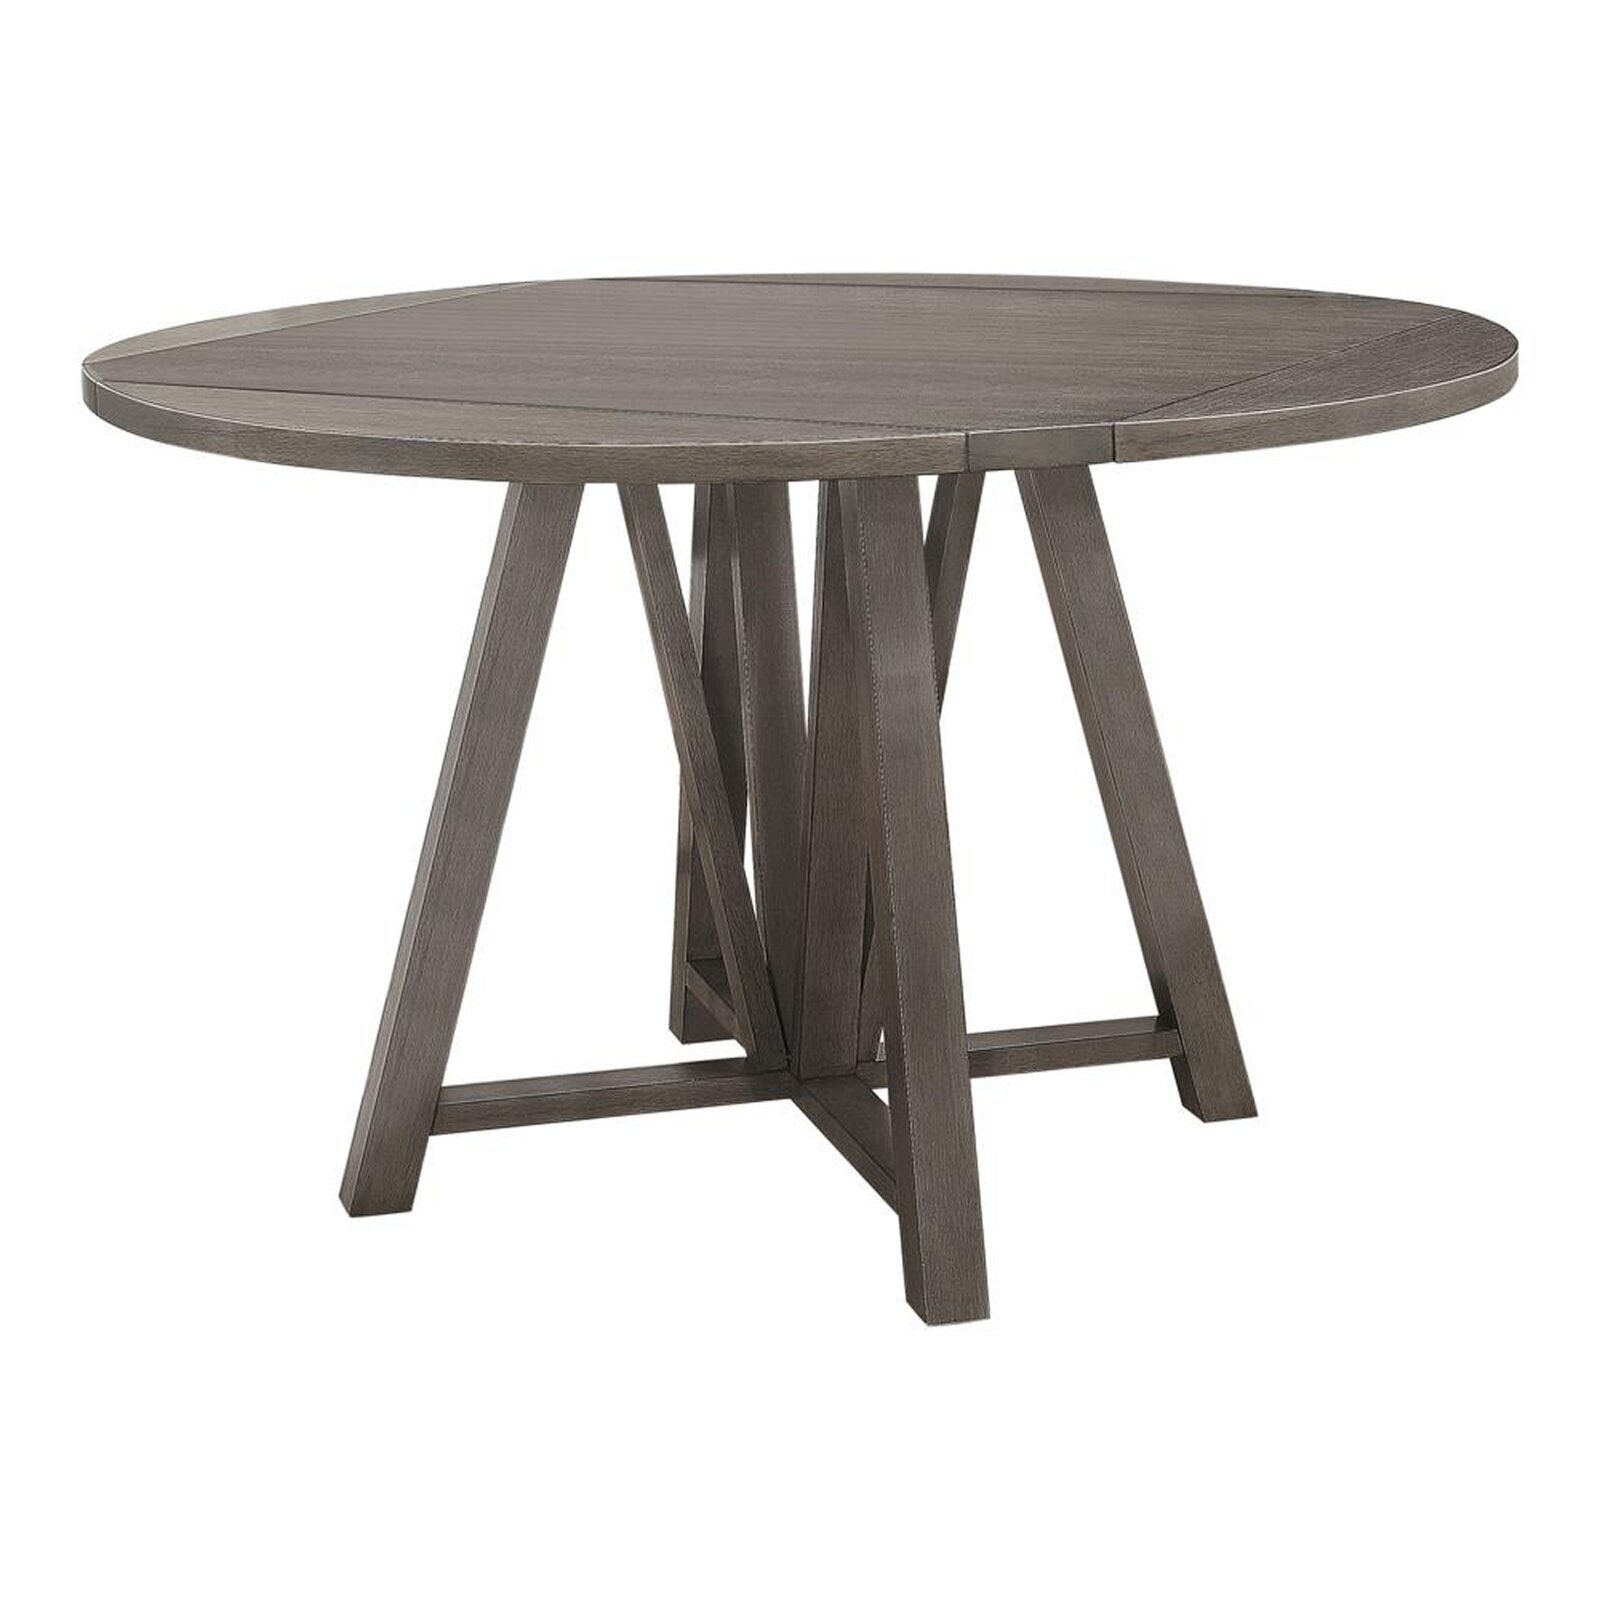 Large Round Counter Height Dining Table With Four Drop Leaves